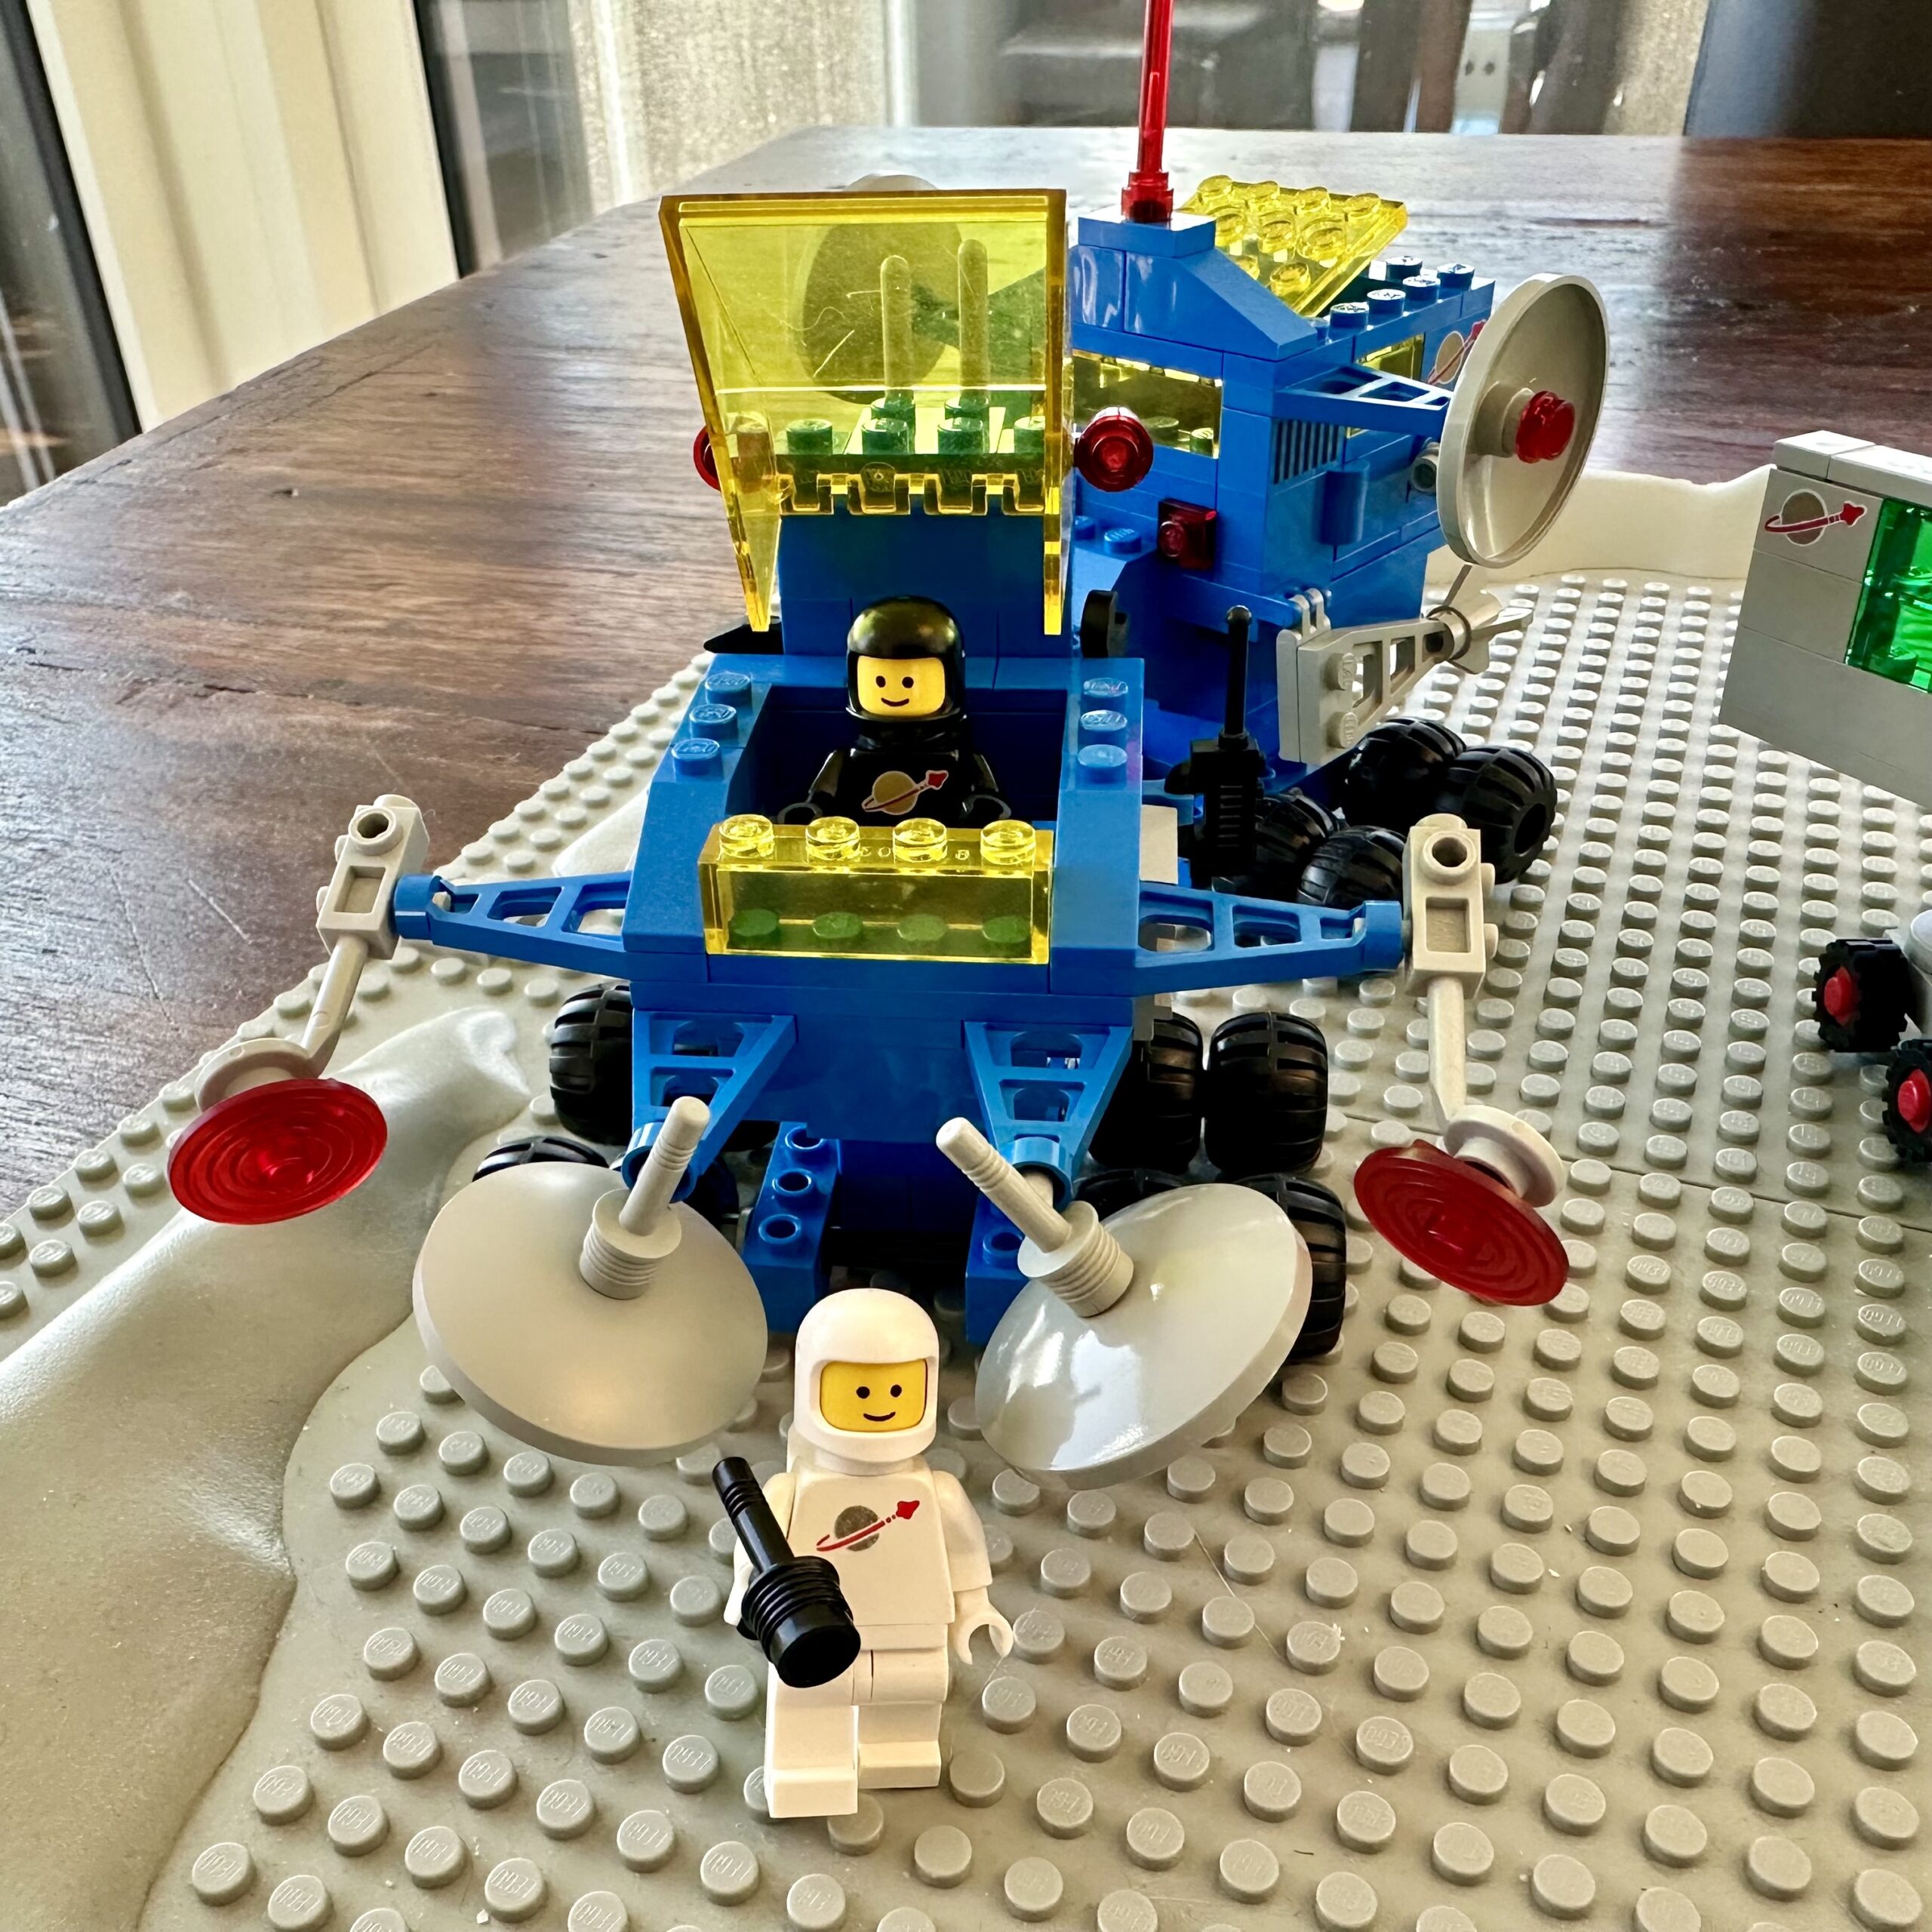 LEGO set 6928: Uranium Search Vehicle from 1984. This blue vehicle has yellow windows and came with white and black suited astronauts.